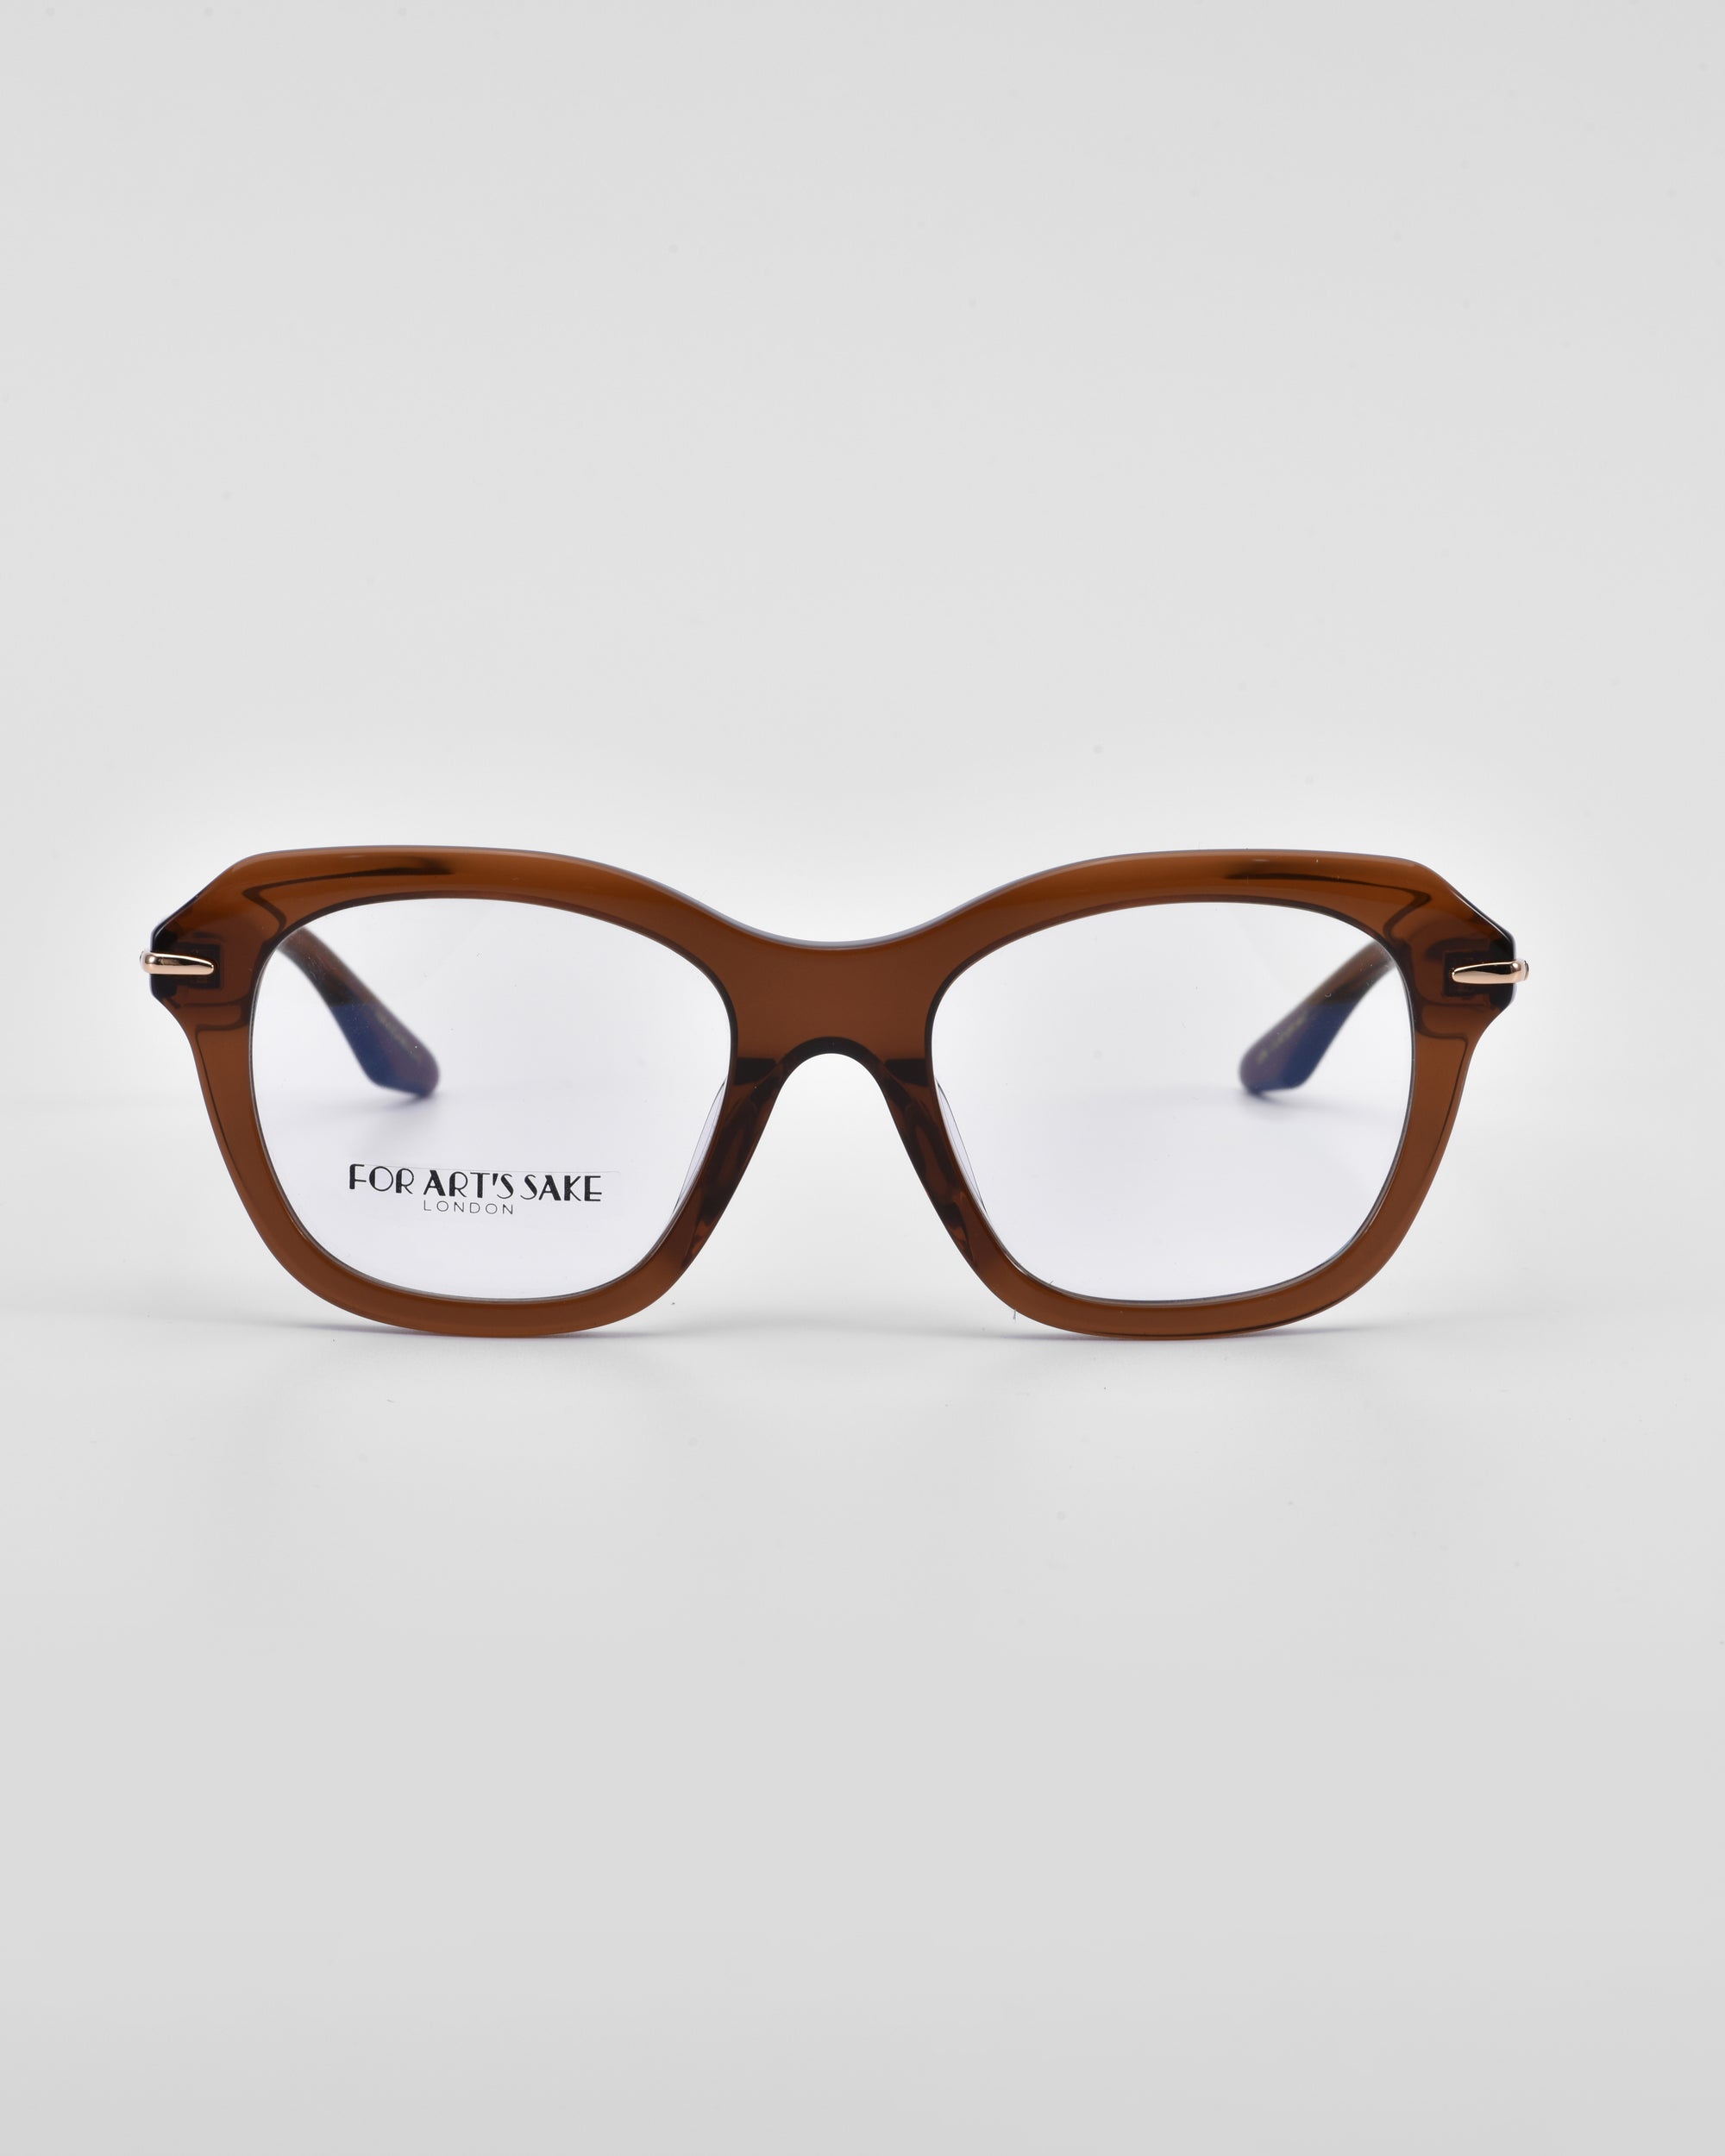 A pair of square-shaped, brown-framed eyeglasses with clear lenses is centered against a white background. The left lens features the brand name "For Art's Sake®" printed in small black text, showcasing their exquisite craftsmanship in 18-karat gold plating. This particular product is known as the Helene.